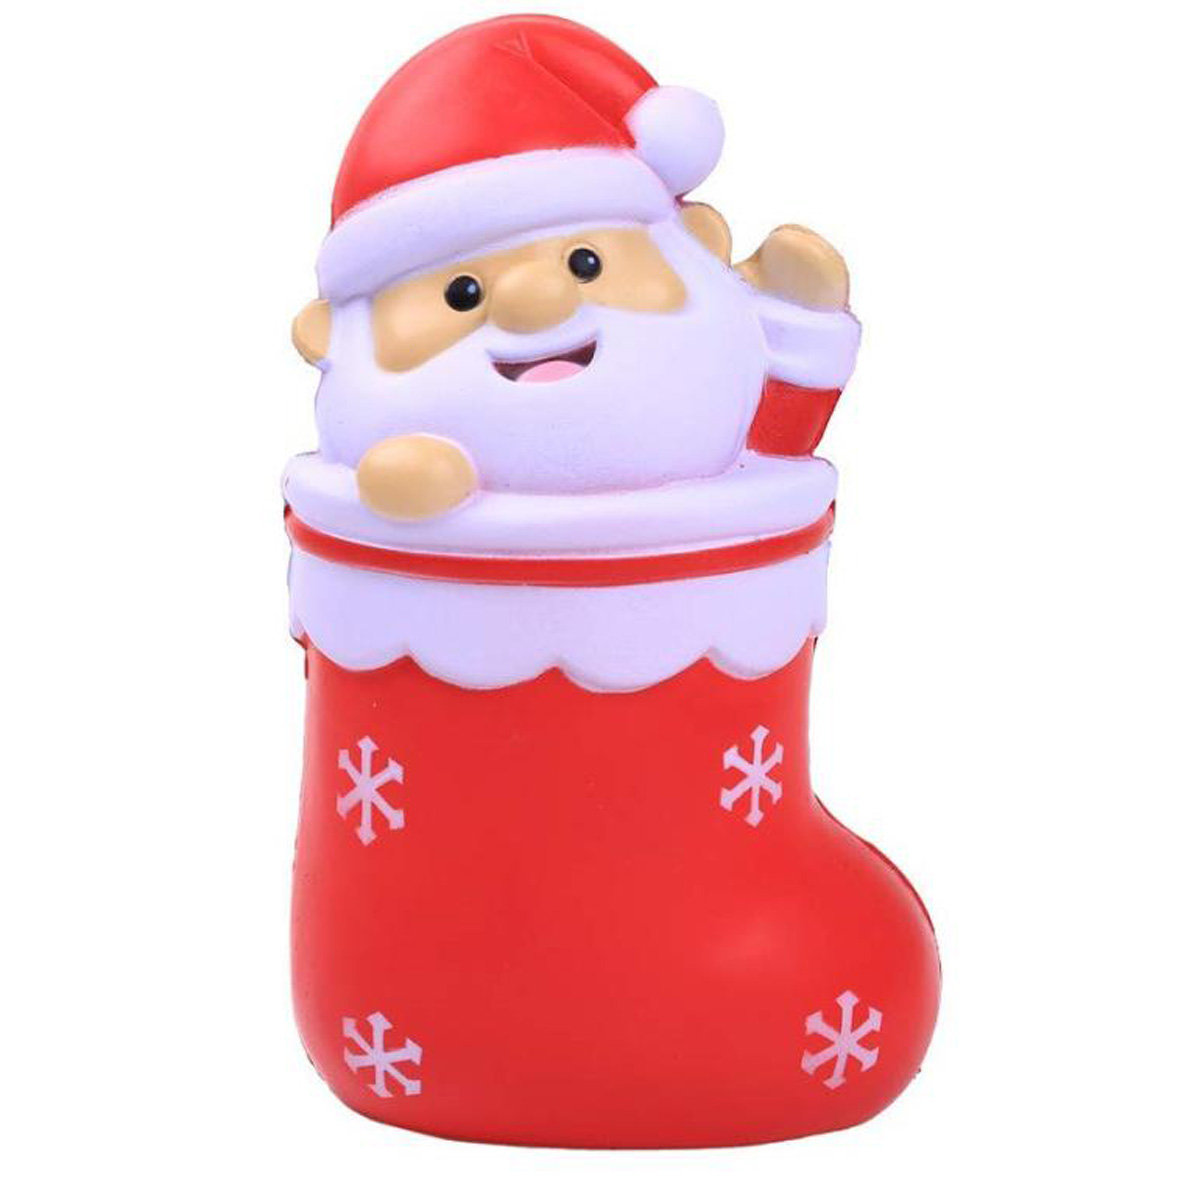 GL-ELY1050 Santa Claus Stress Release Toy